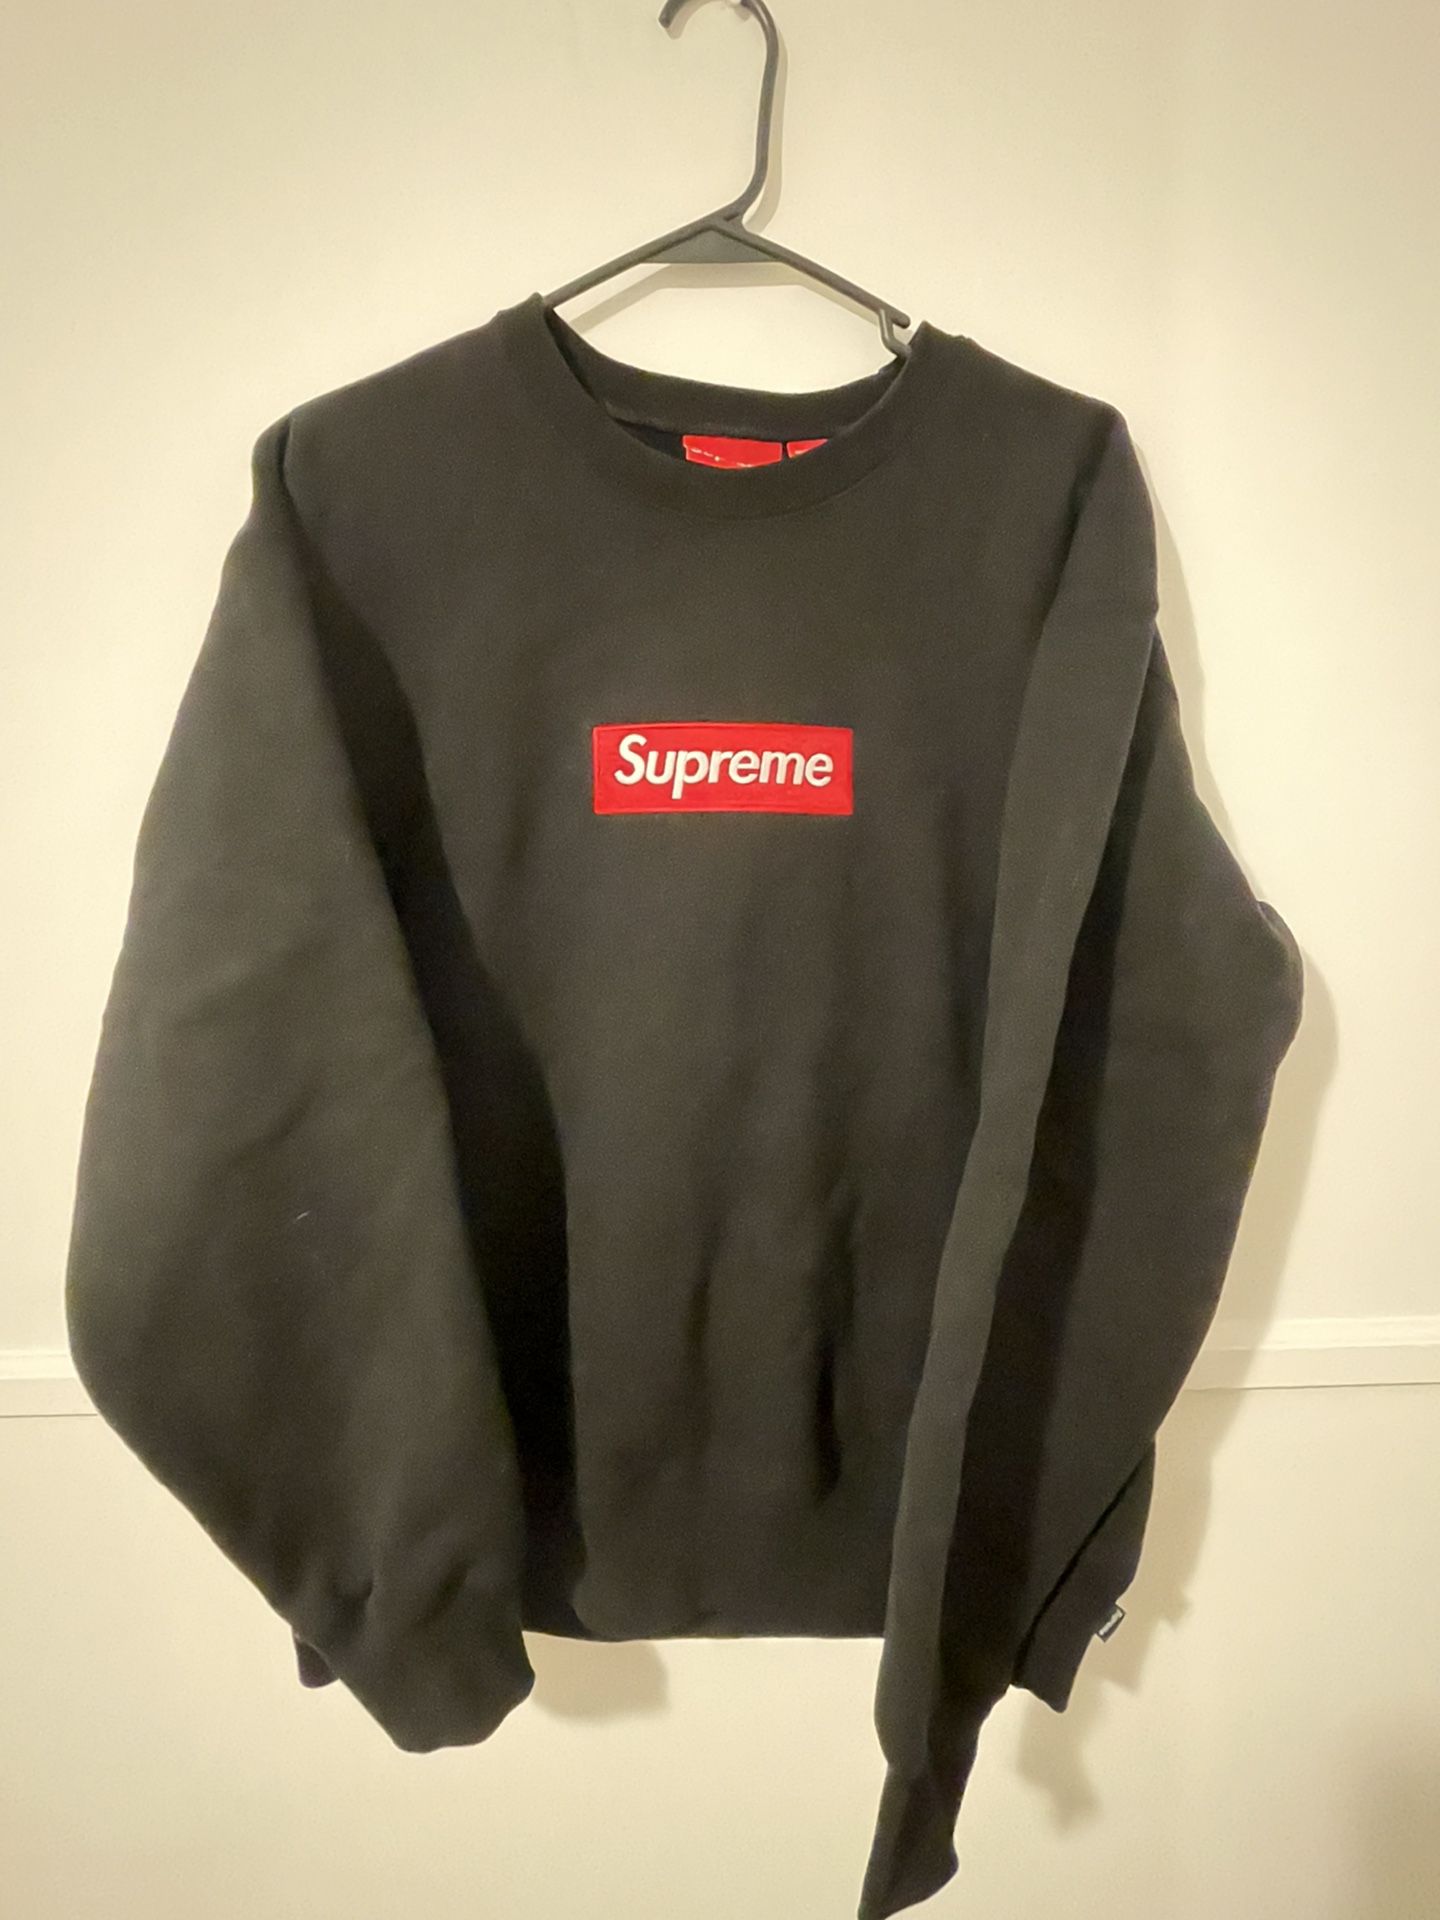 Supreme Box Logo Crewneck Size M for Sale in Yonkers, NY